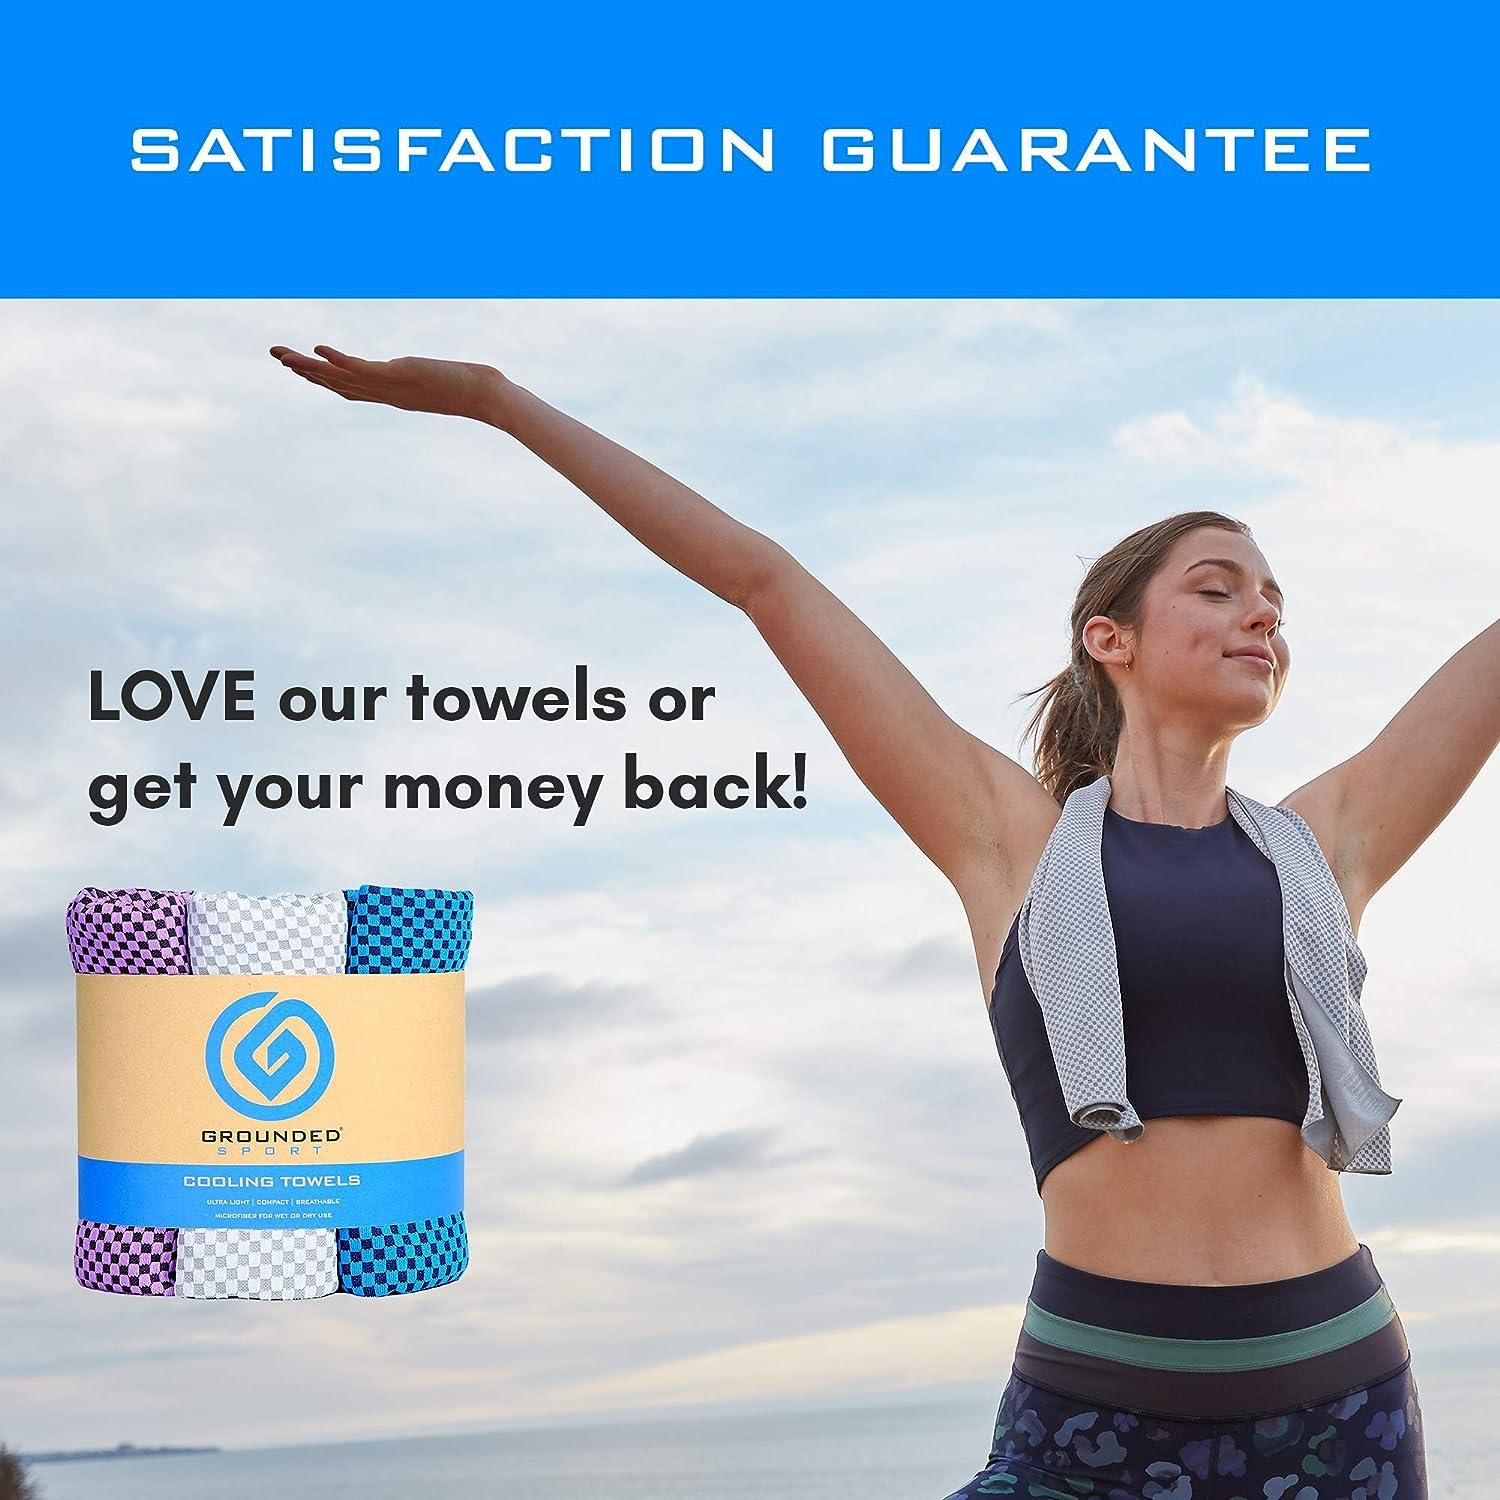 1-Pack Microfiber Gym Towels - Quick Dry Workout And Sweat Towel